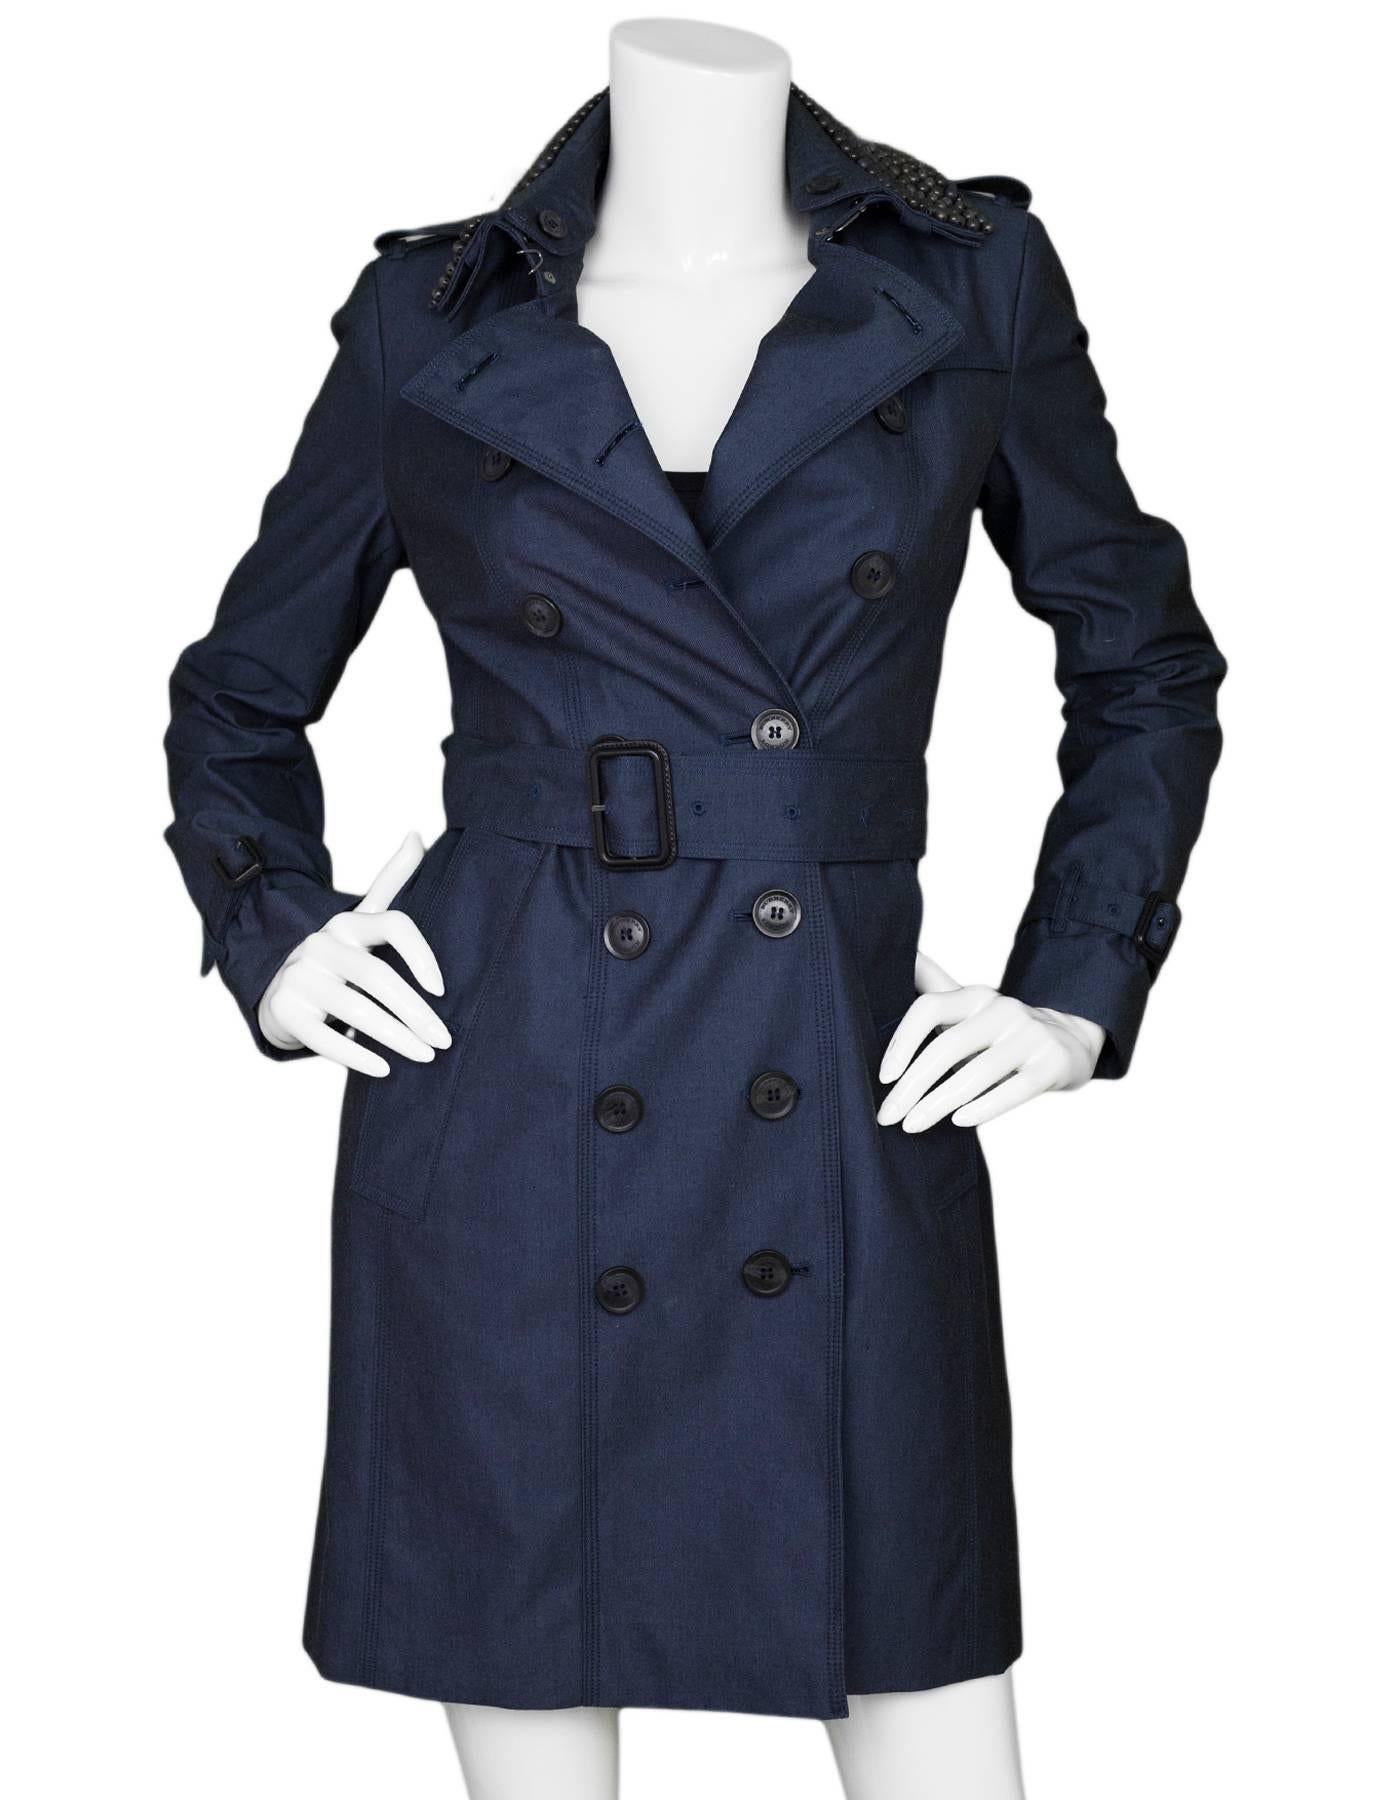 Burberry London Queenshouse Trench Coat Sz US4

Features optional beaded collar

Made In: Bosnia
Color: Blue
Composition: 100% Cotton
Lining: Black plaid nova check
Closure/Opening: Double breasted button closure
Exterior Pockets: Two hip